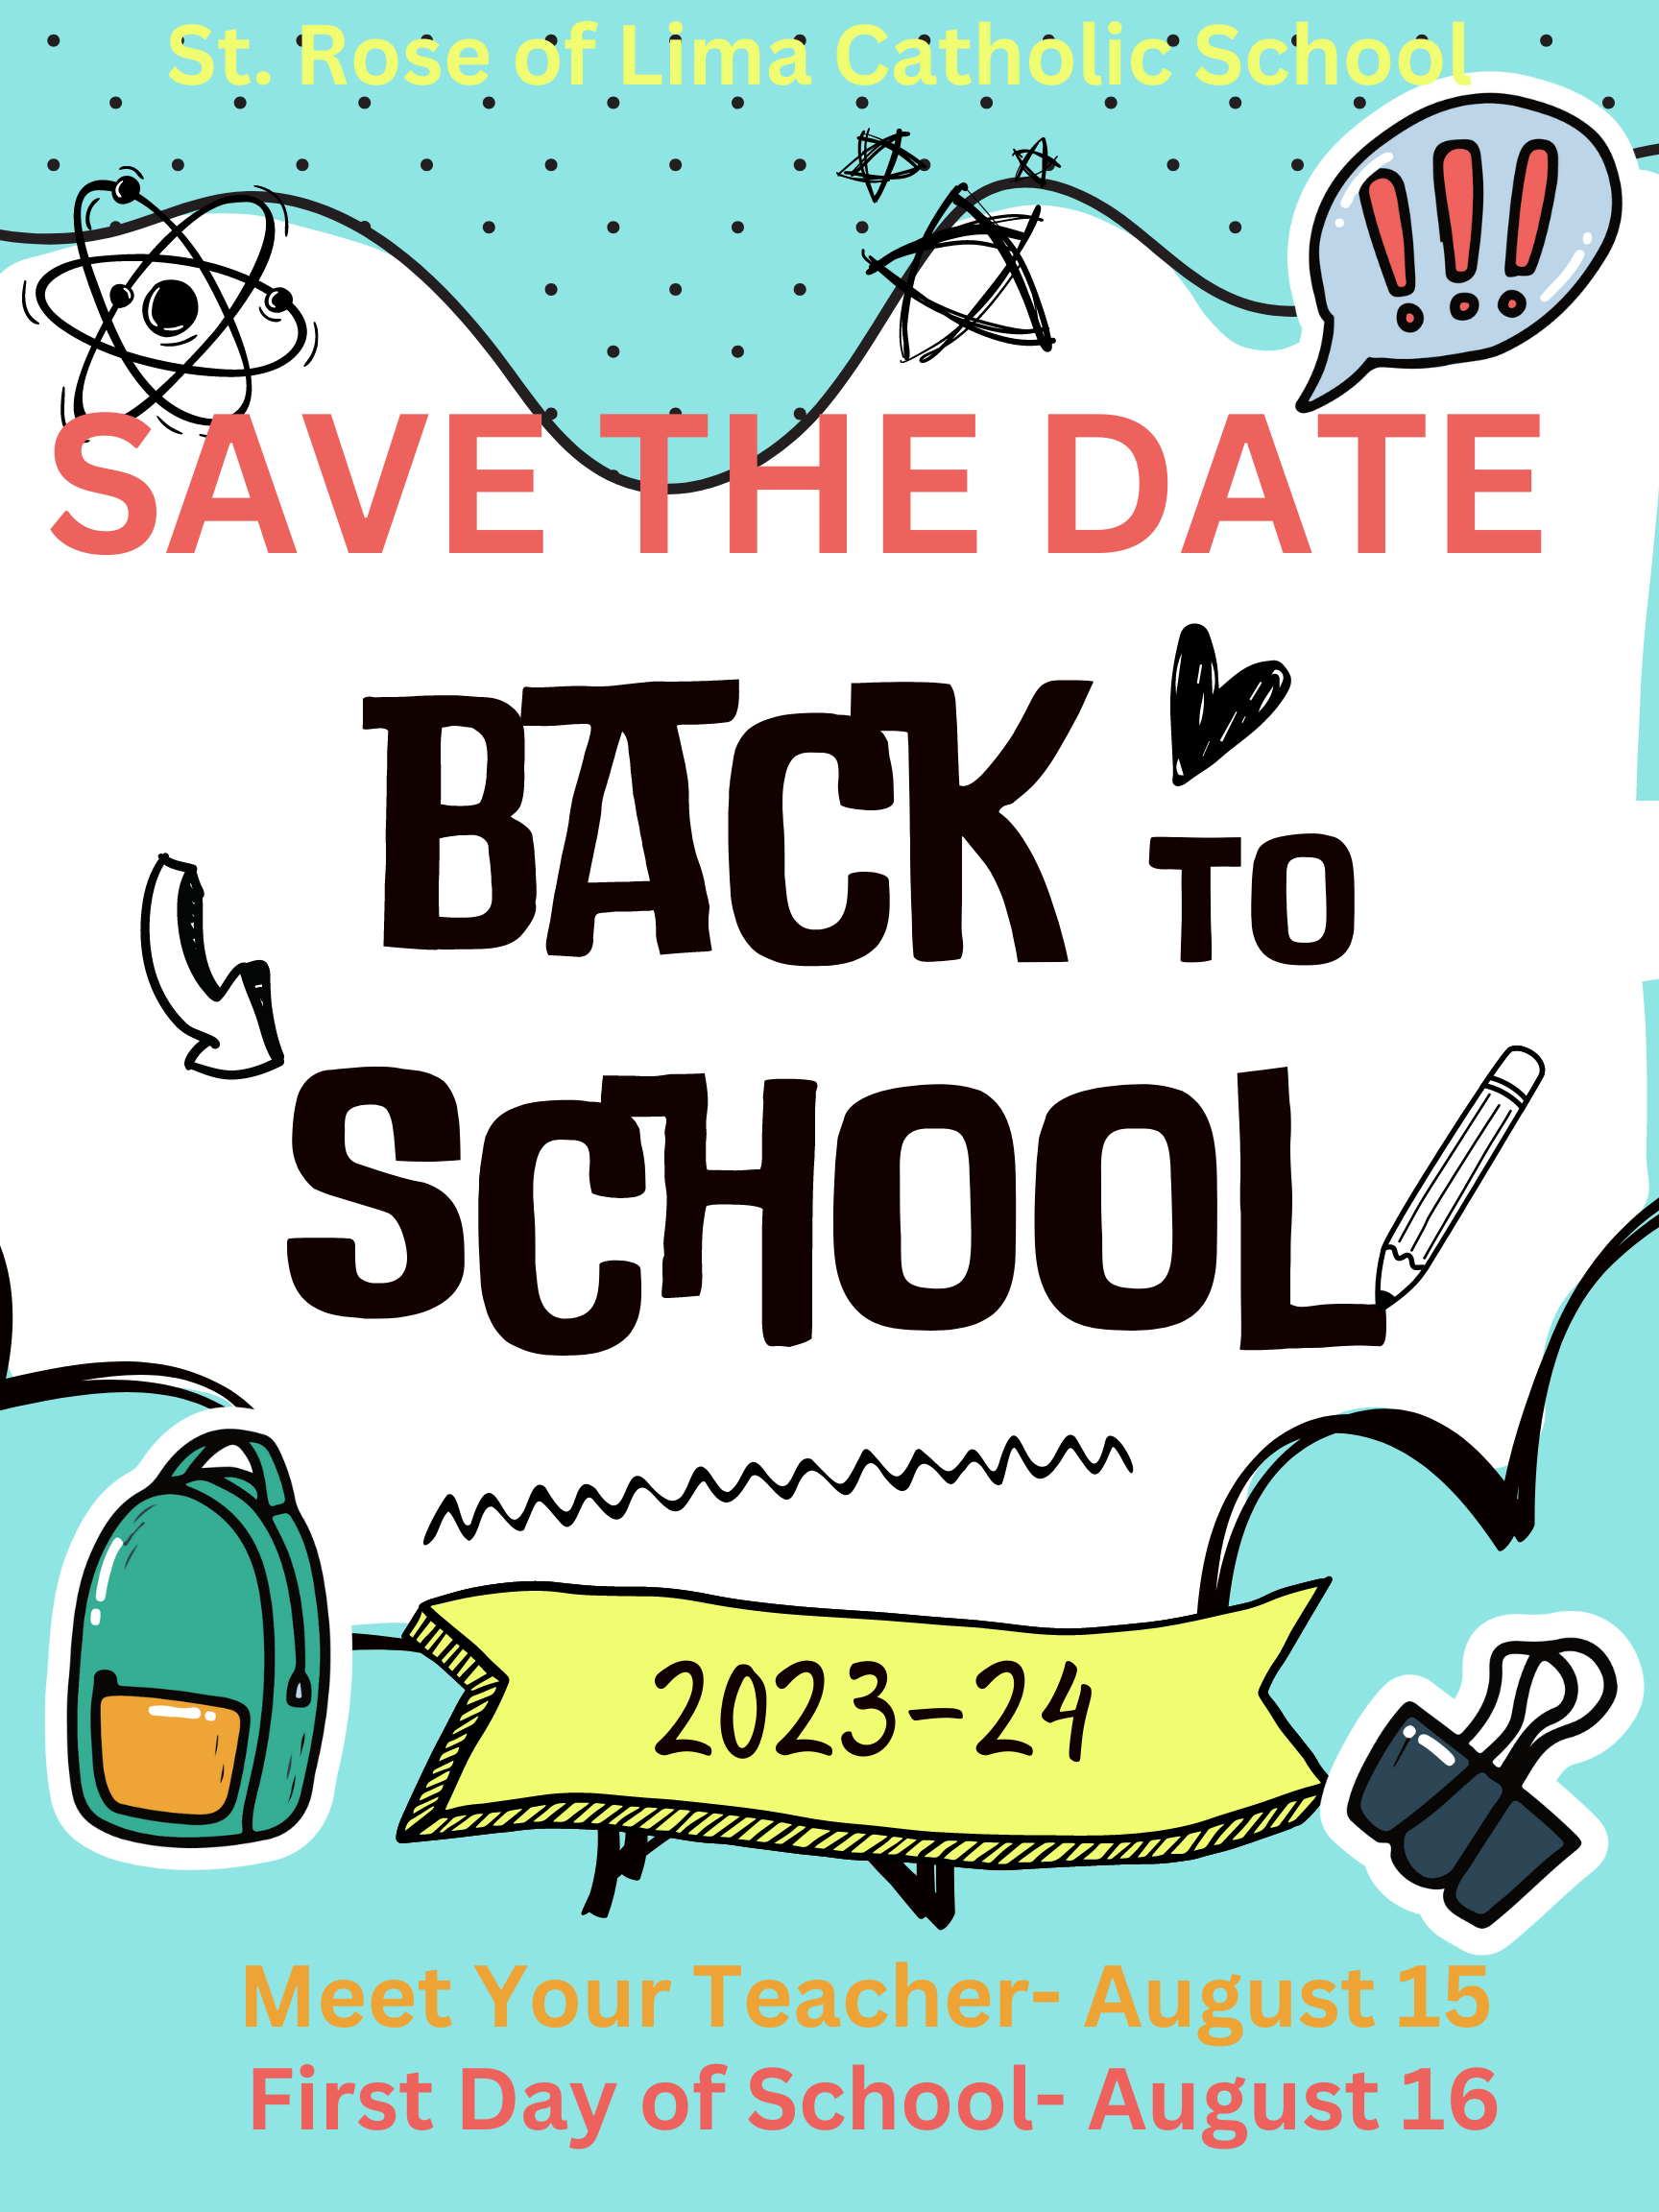 Back to School SAVE THE DATE Flyer 2023